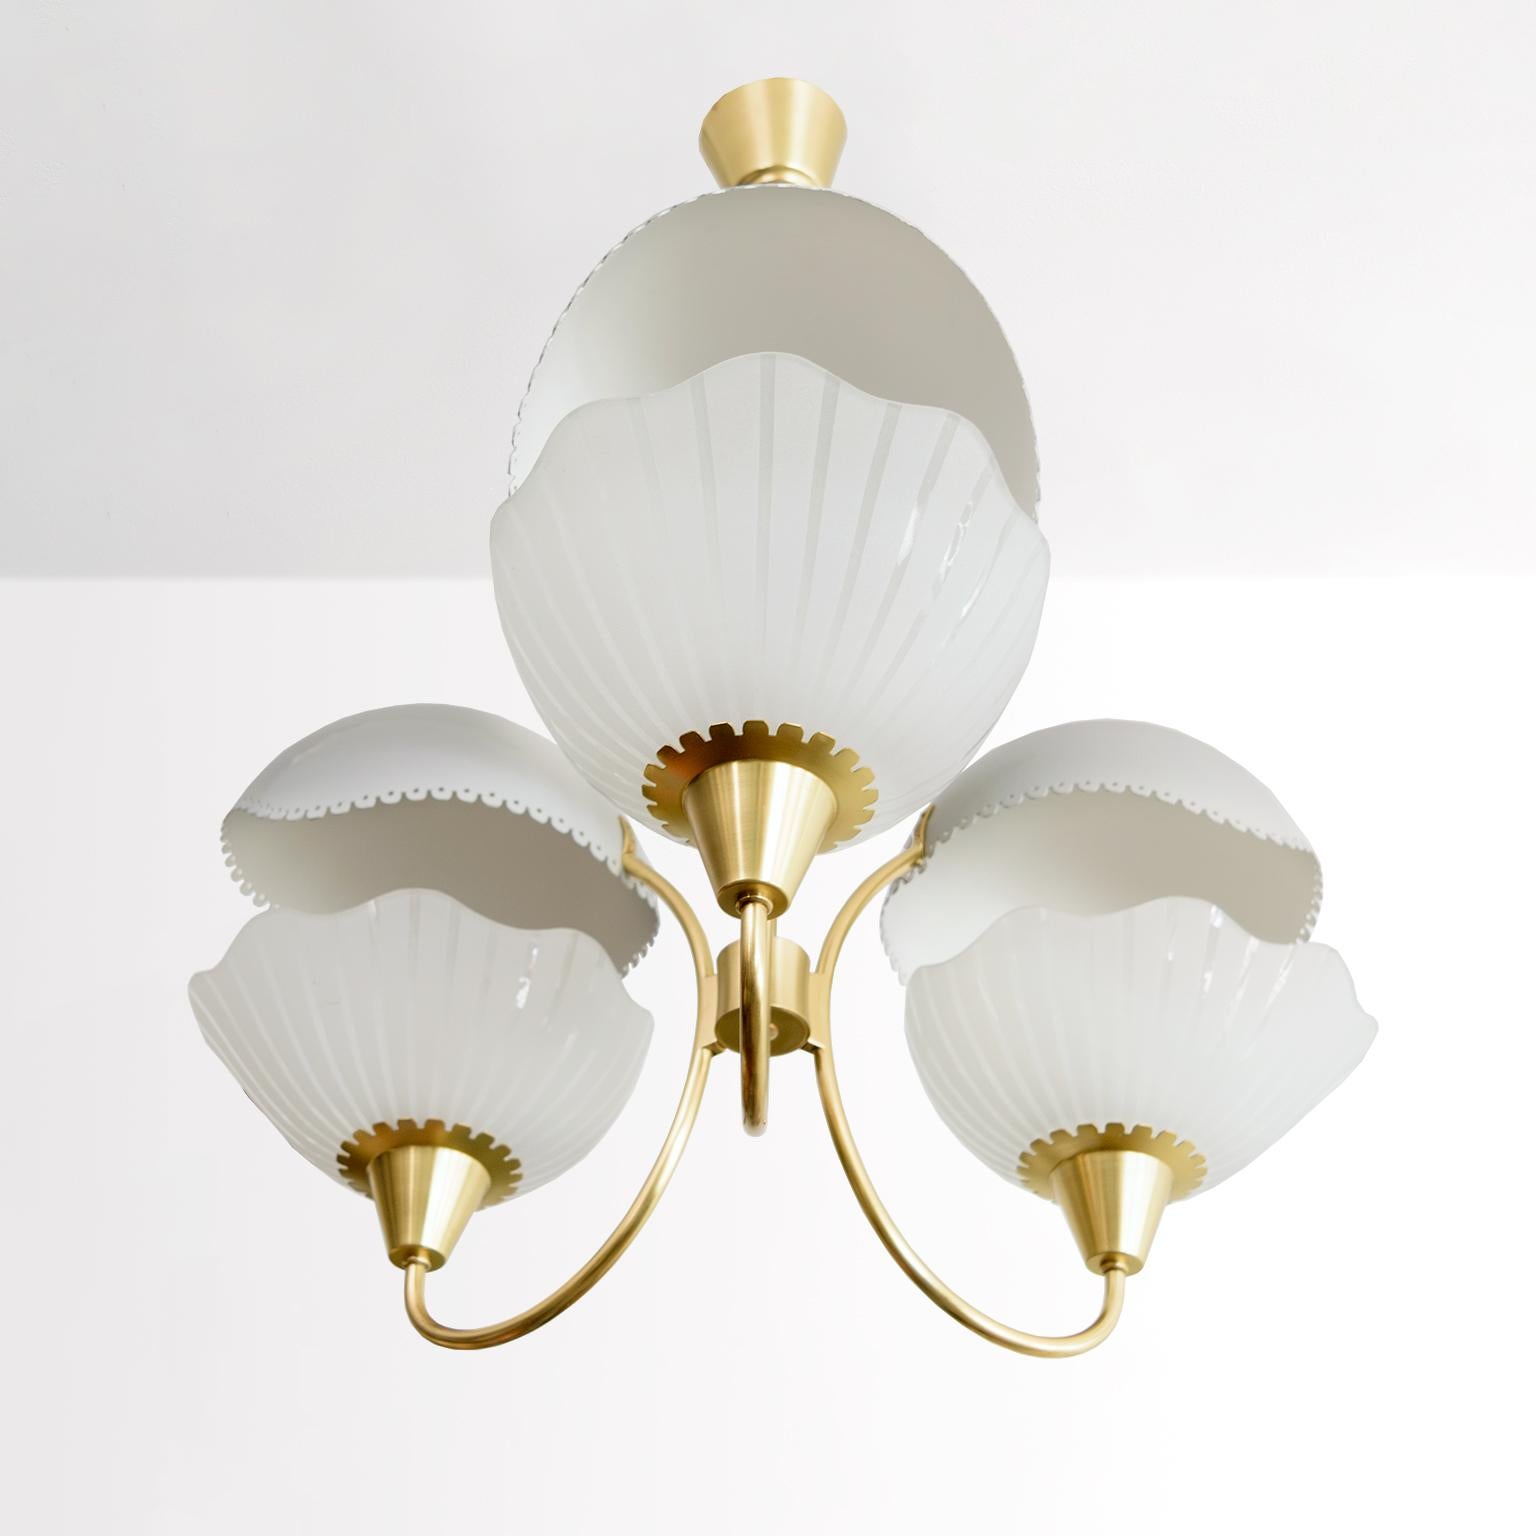 Polished Harald Notini desigend for Orrefors 3-arm Chandelier with 3 etched glass shades